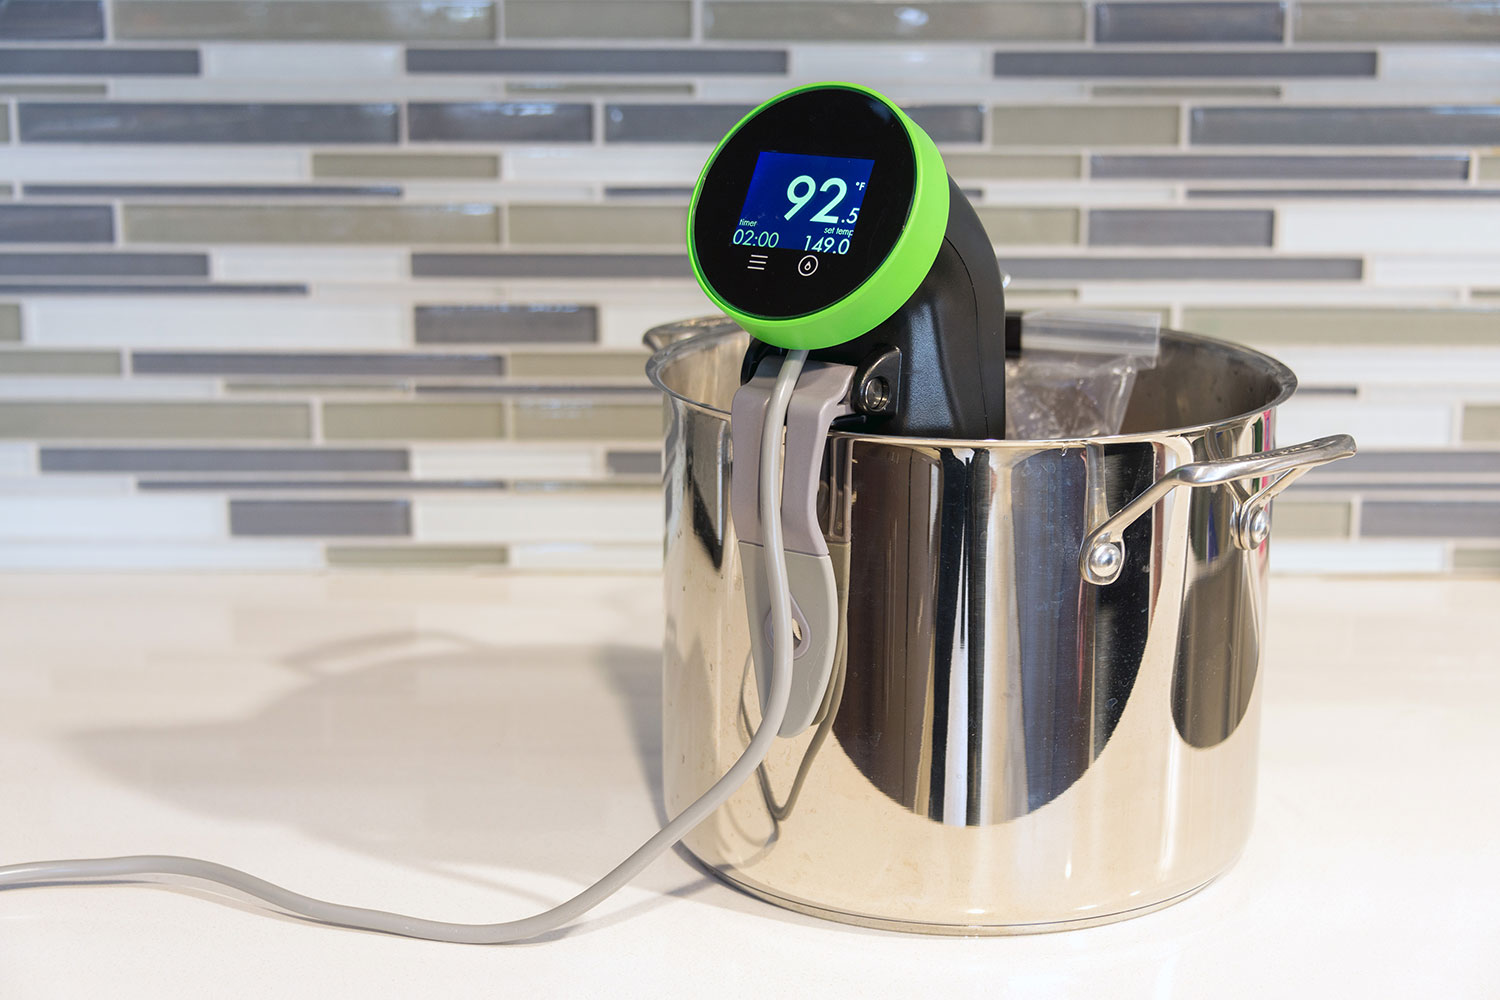 16 Mistakes Everyone Makes With Sous Vide